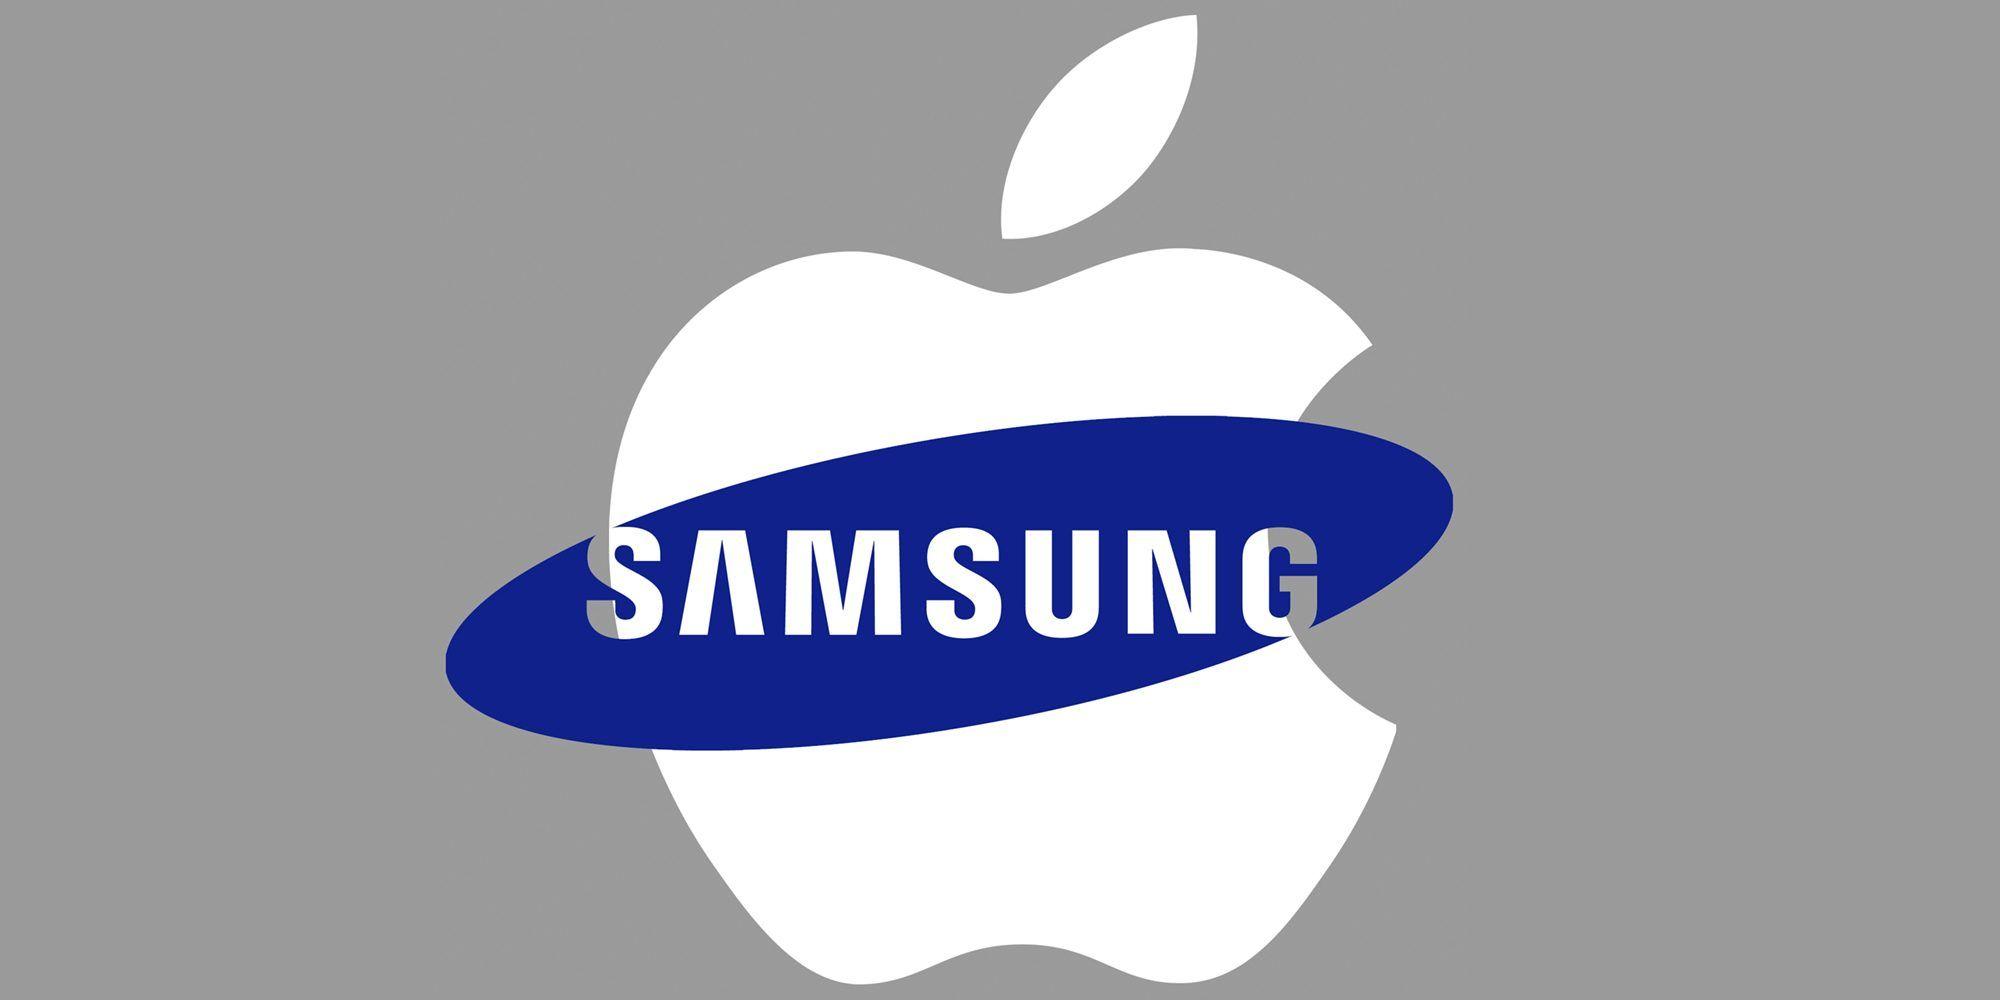 Samsung Phone Logo - Samsung Launched 31 Phones Last Year, but Apple Has the Upper Hand